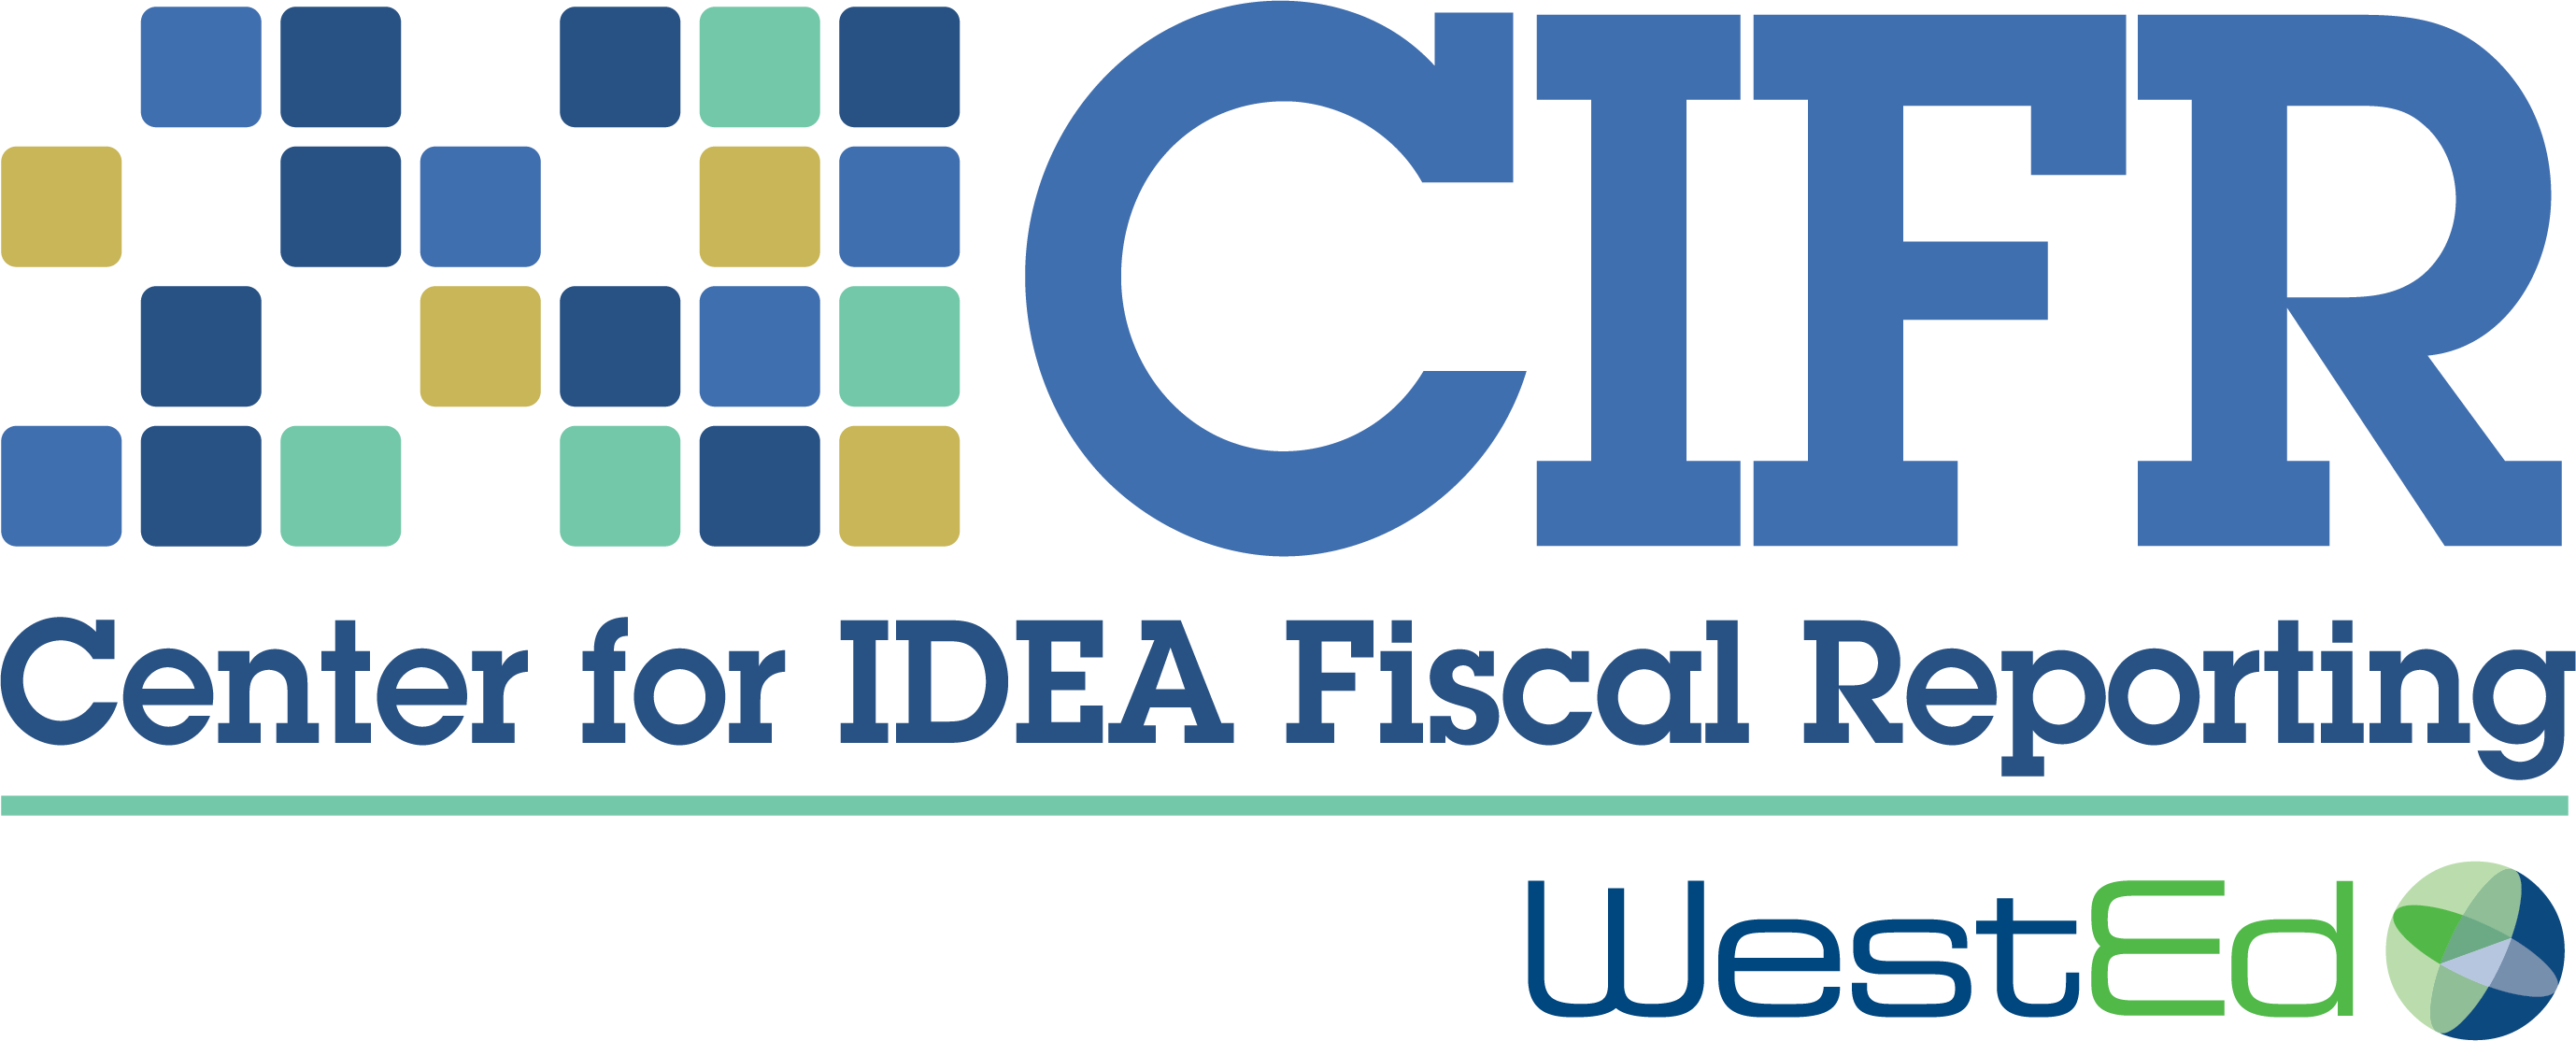 Center for IDEA Fiscal Reporting